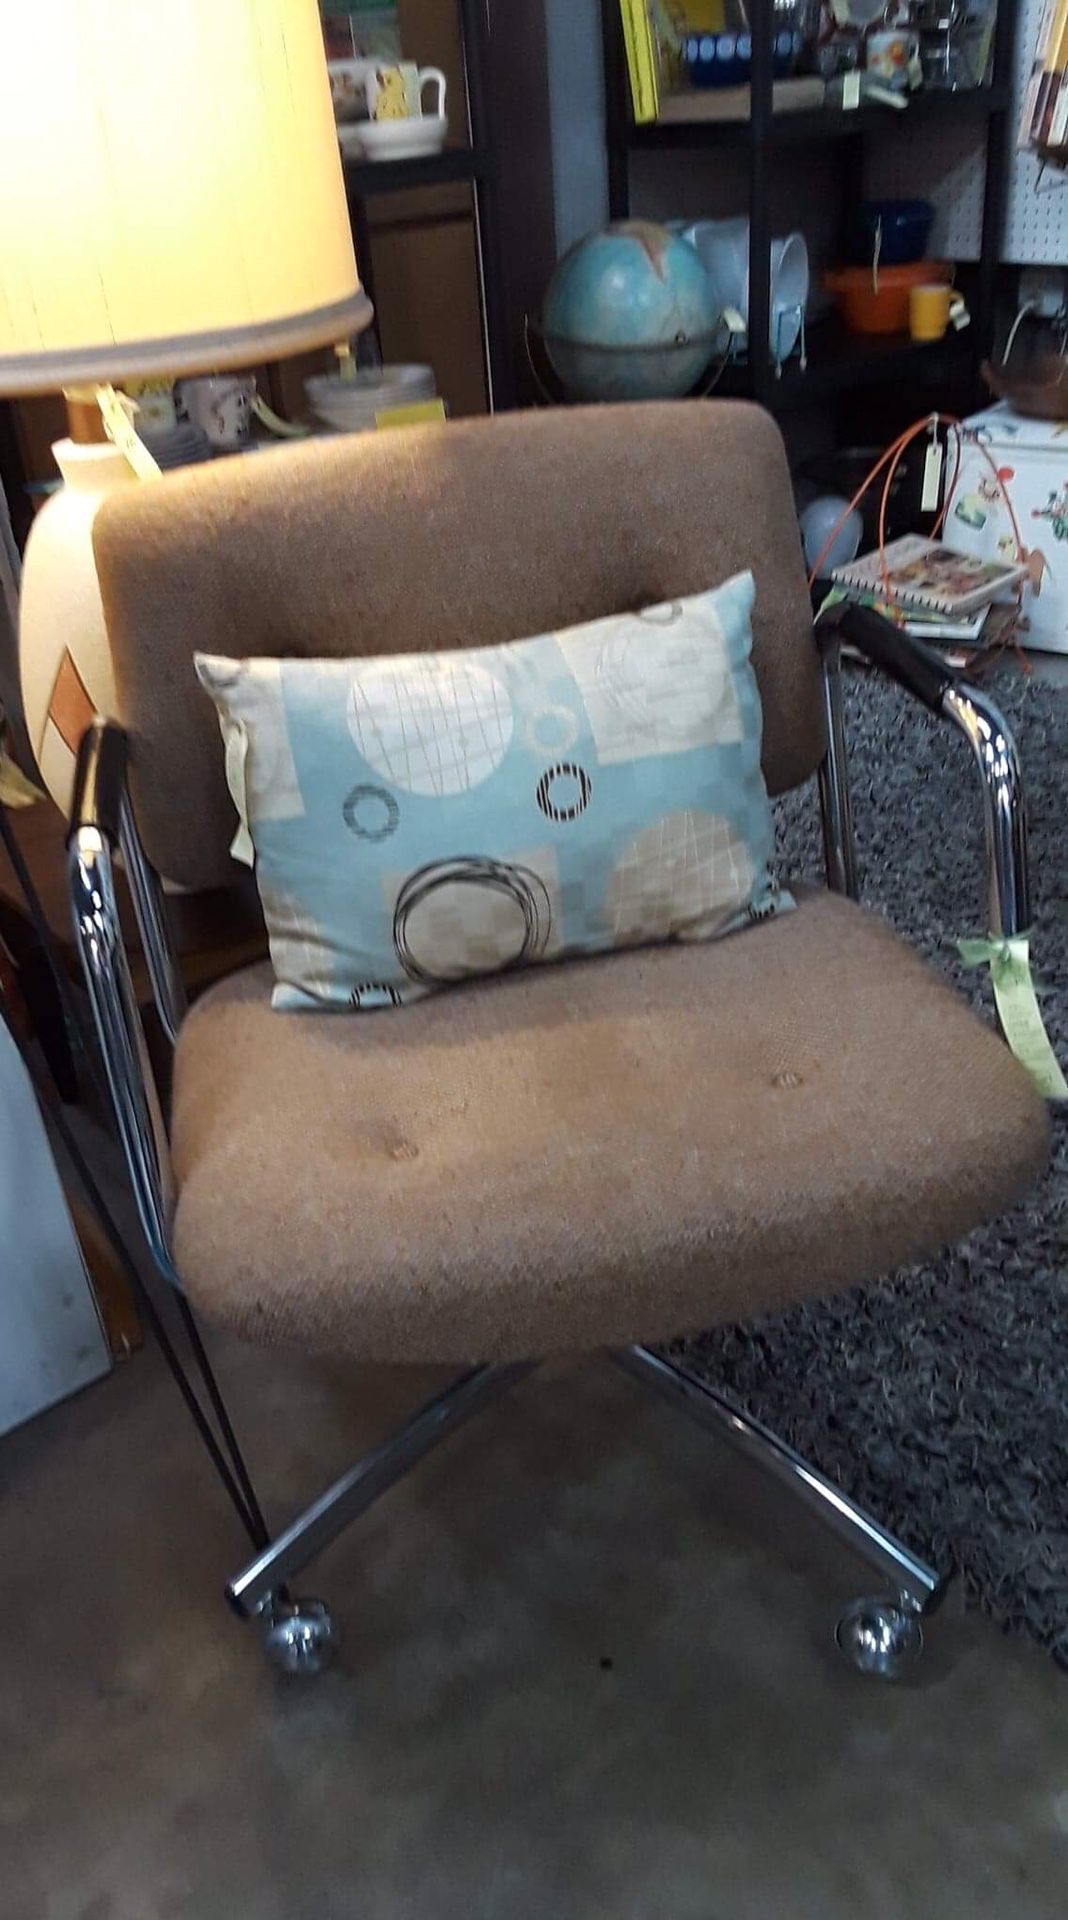 Vintage Steelcase Rolling Swivel Adjustable Chair. Original price $125, Sale price $75. Located at Long Beach Antique Mall 2, 1851 Freeman Ave, Sign